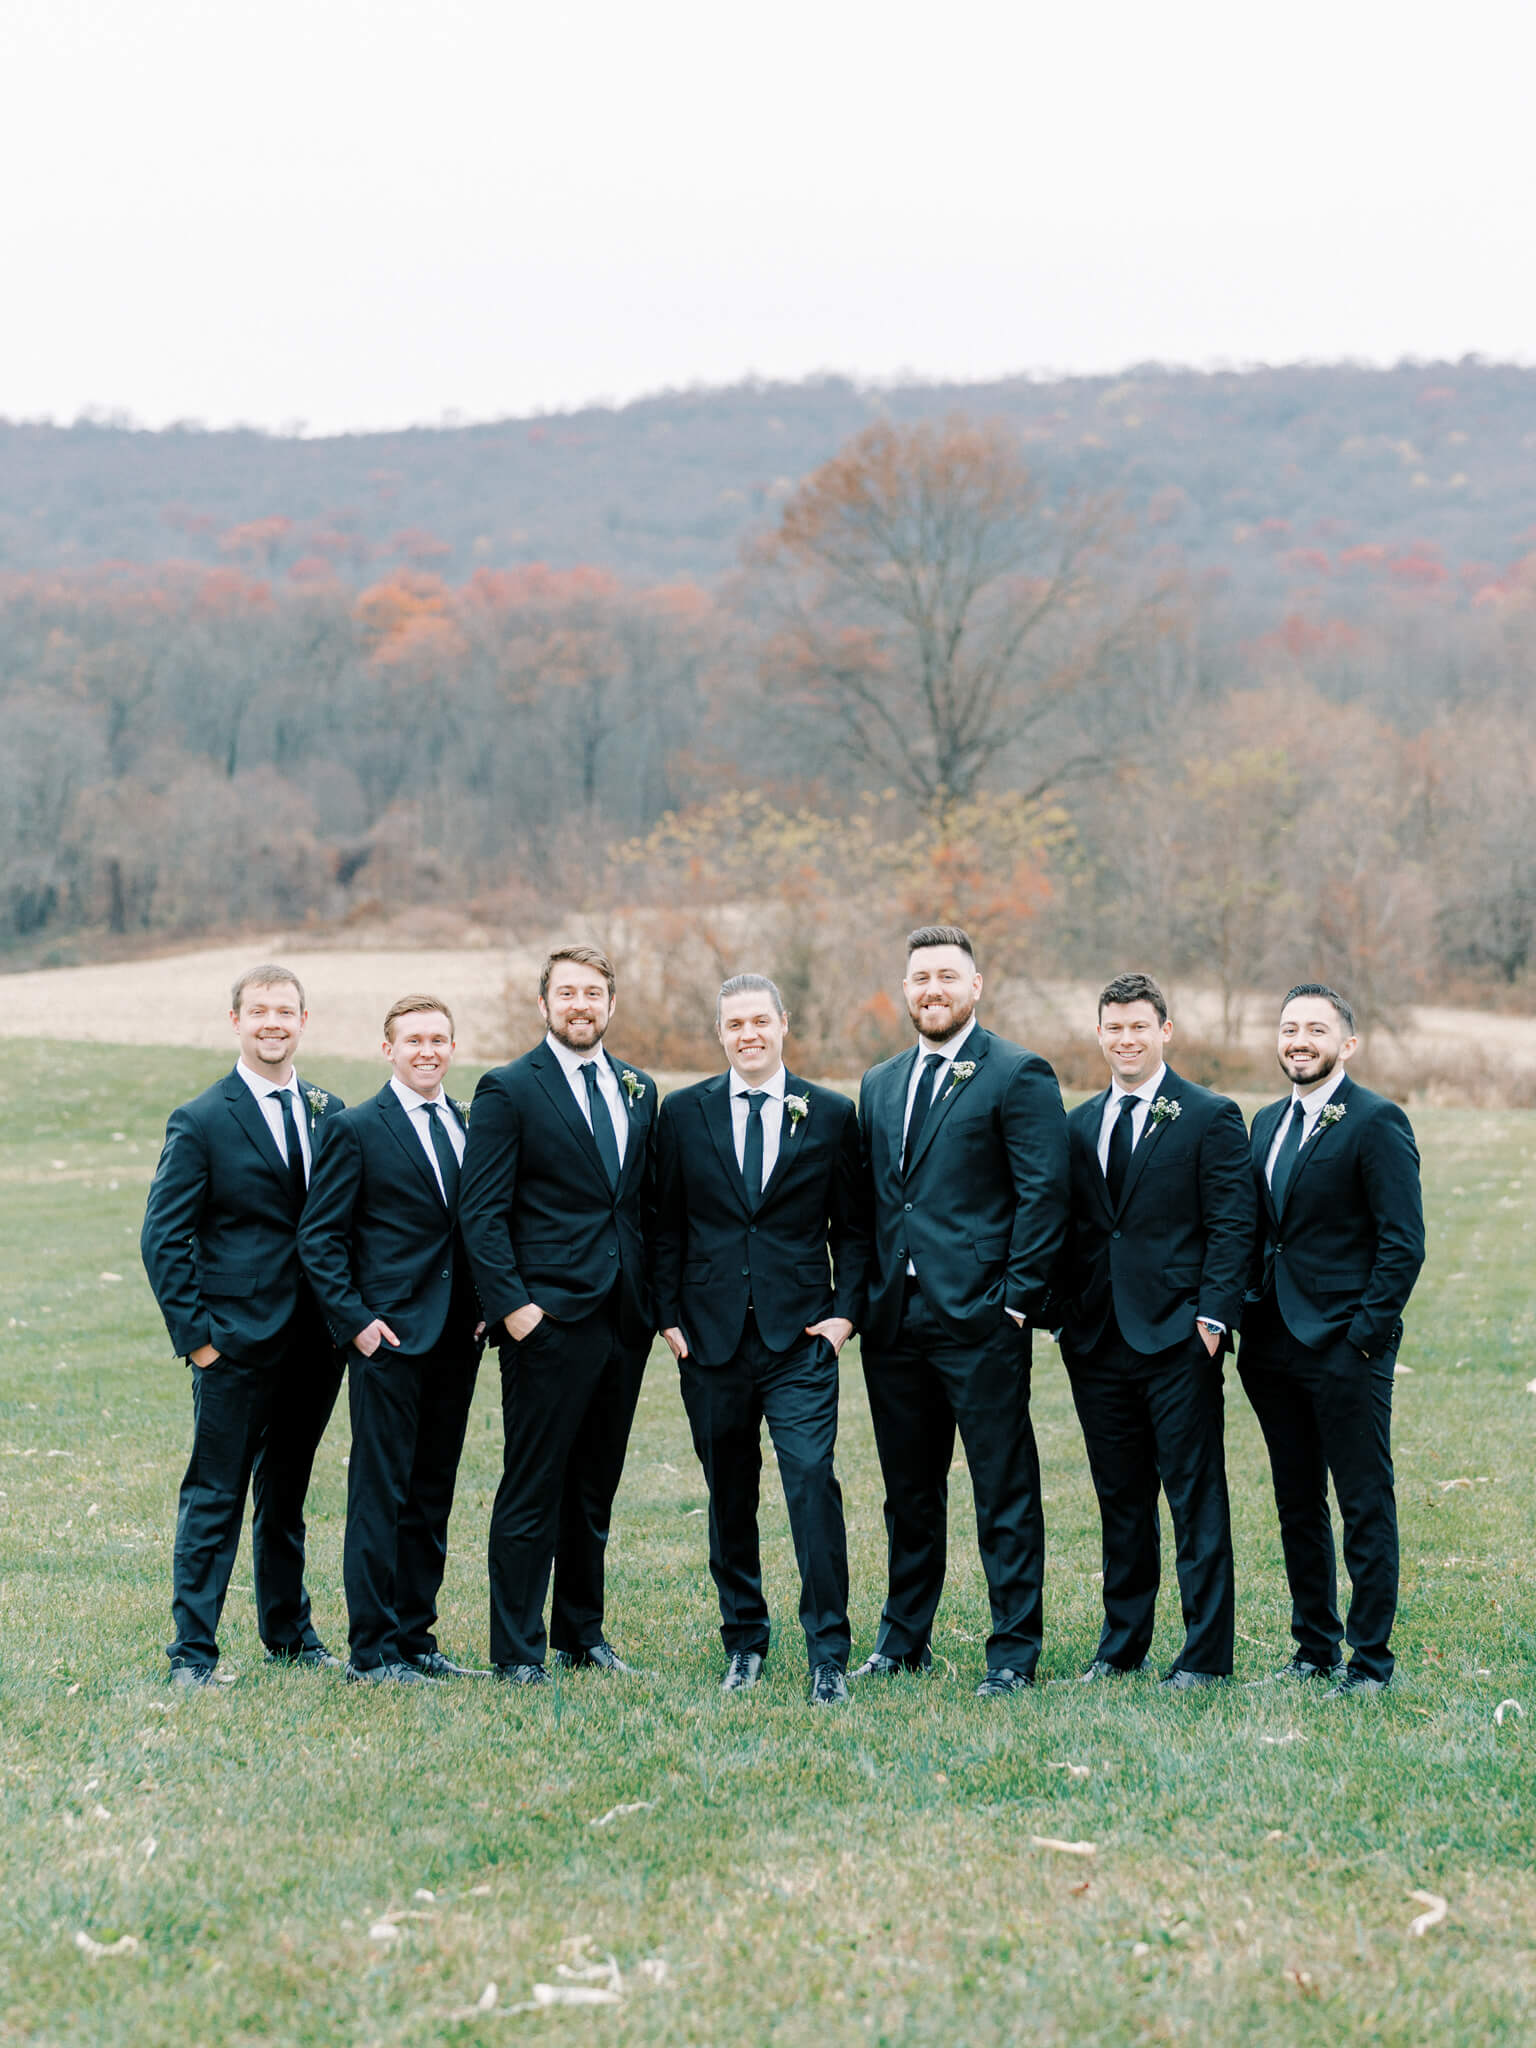 A groom and his groomsmen in black suits in front of a mountainous background.